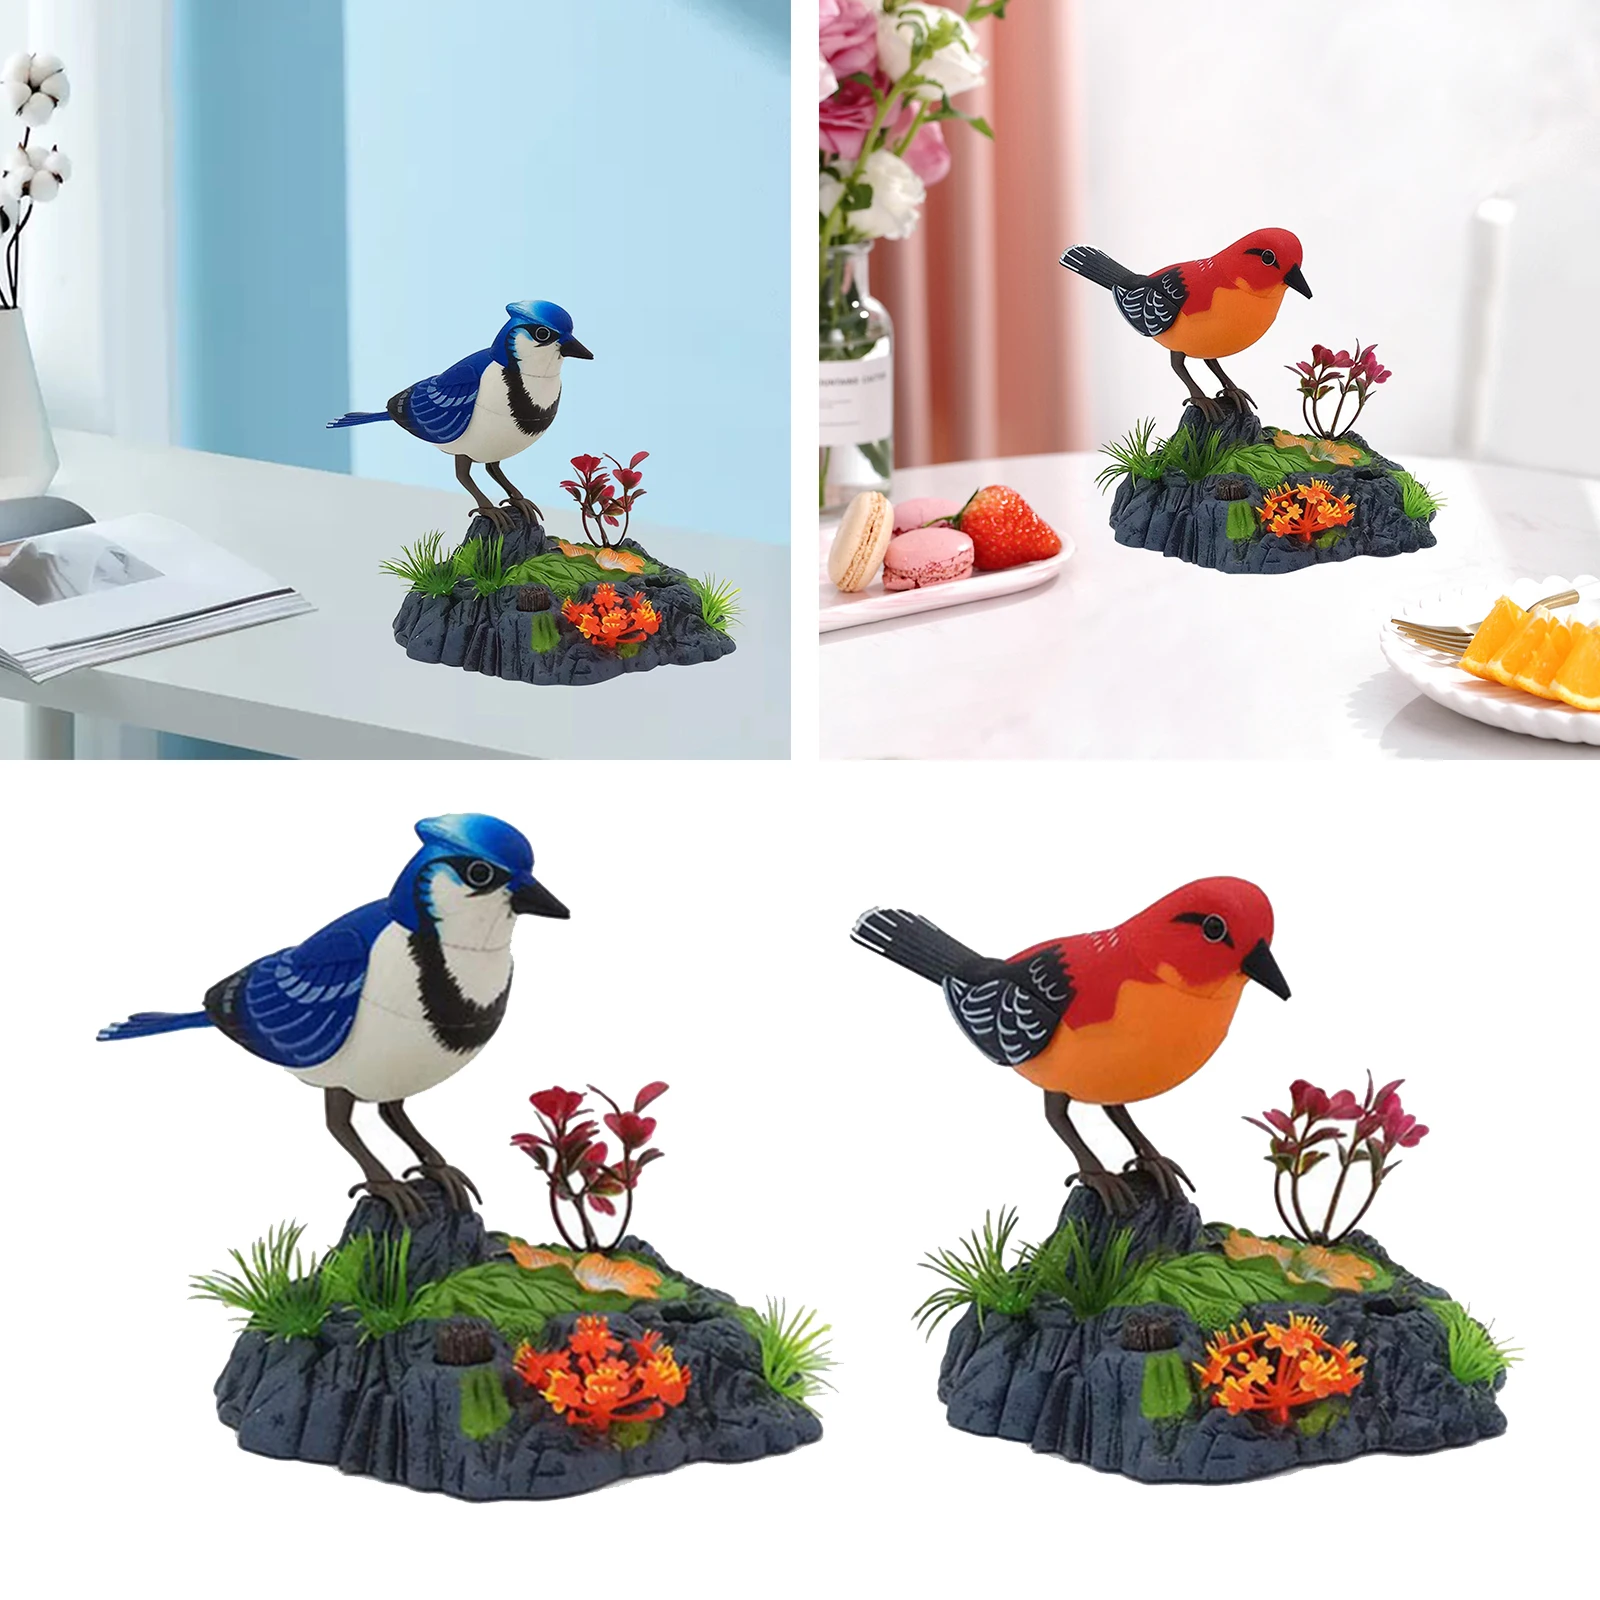 Plastic Voice Control Bird Toy Talking Moving Chirping Bird Festival Perfect Home Bedroom Decoration Education Toy for Children